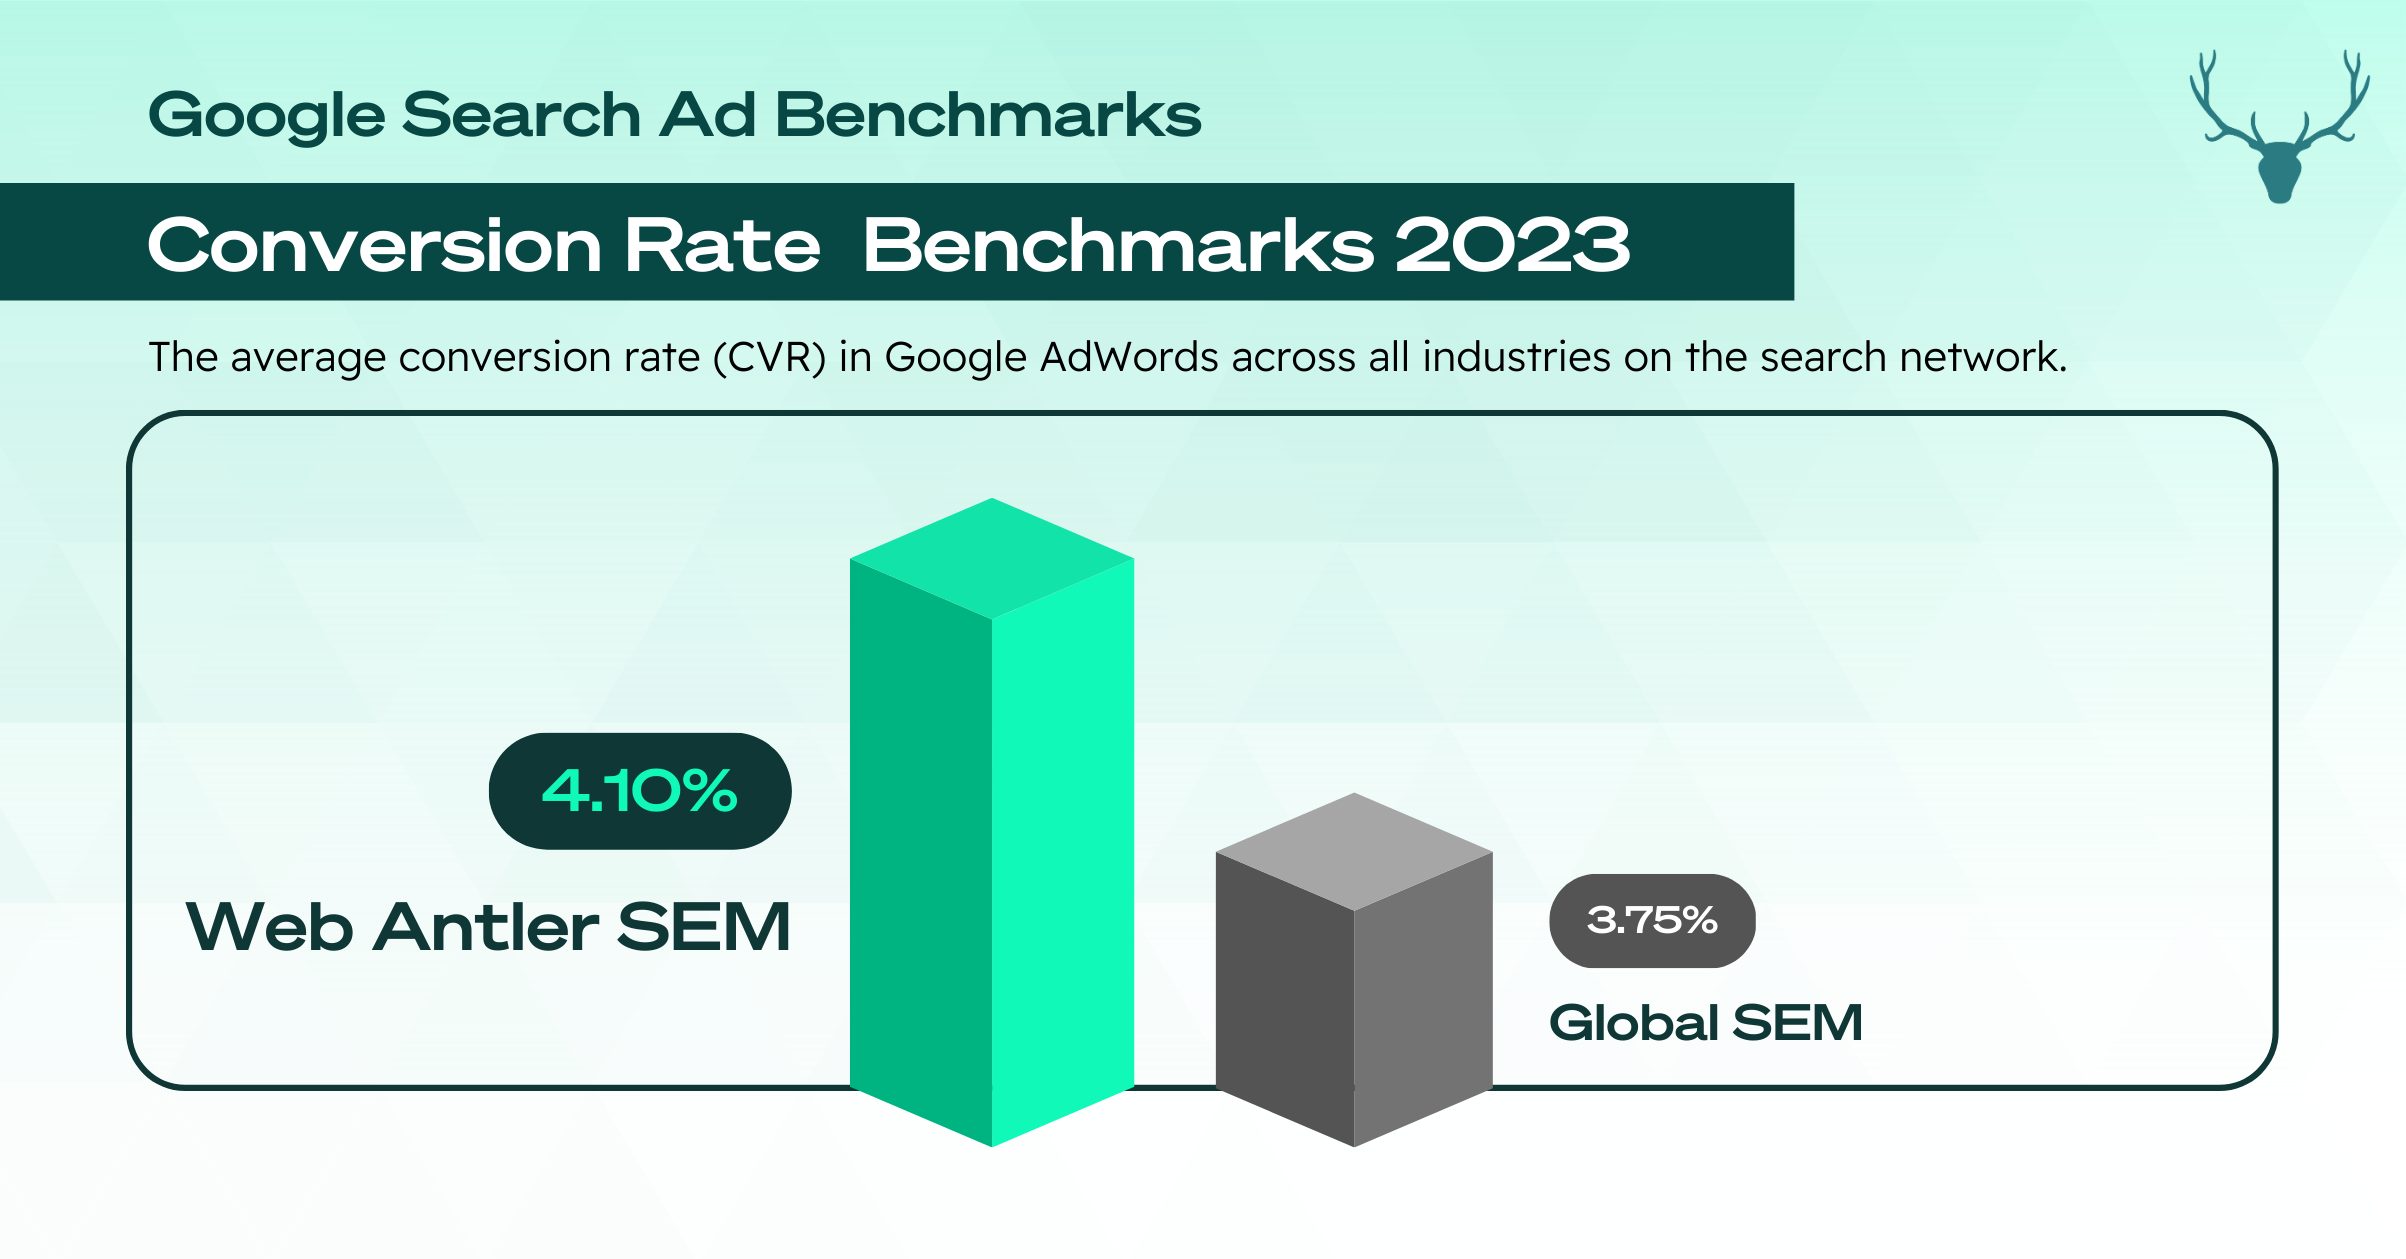 Google Search Ad Benchmarks Conversion Rate 2023 NZ